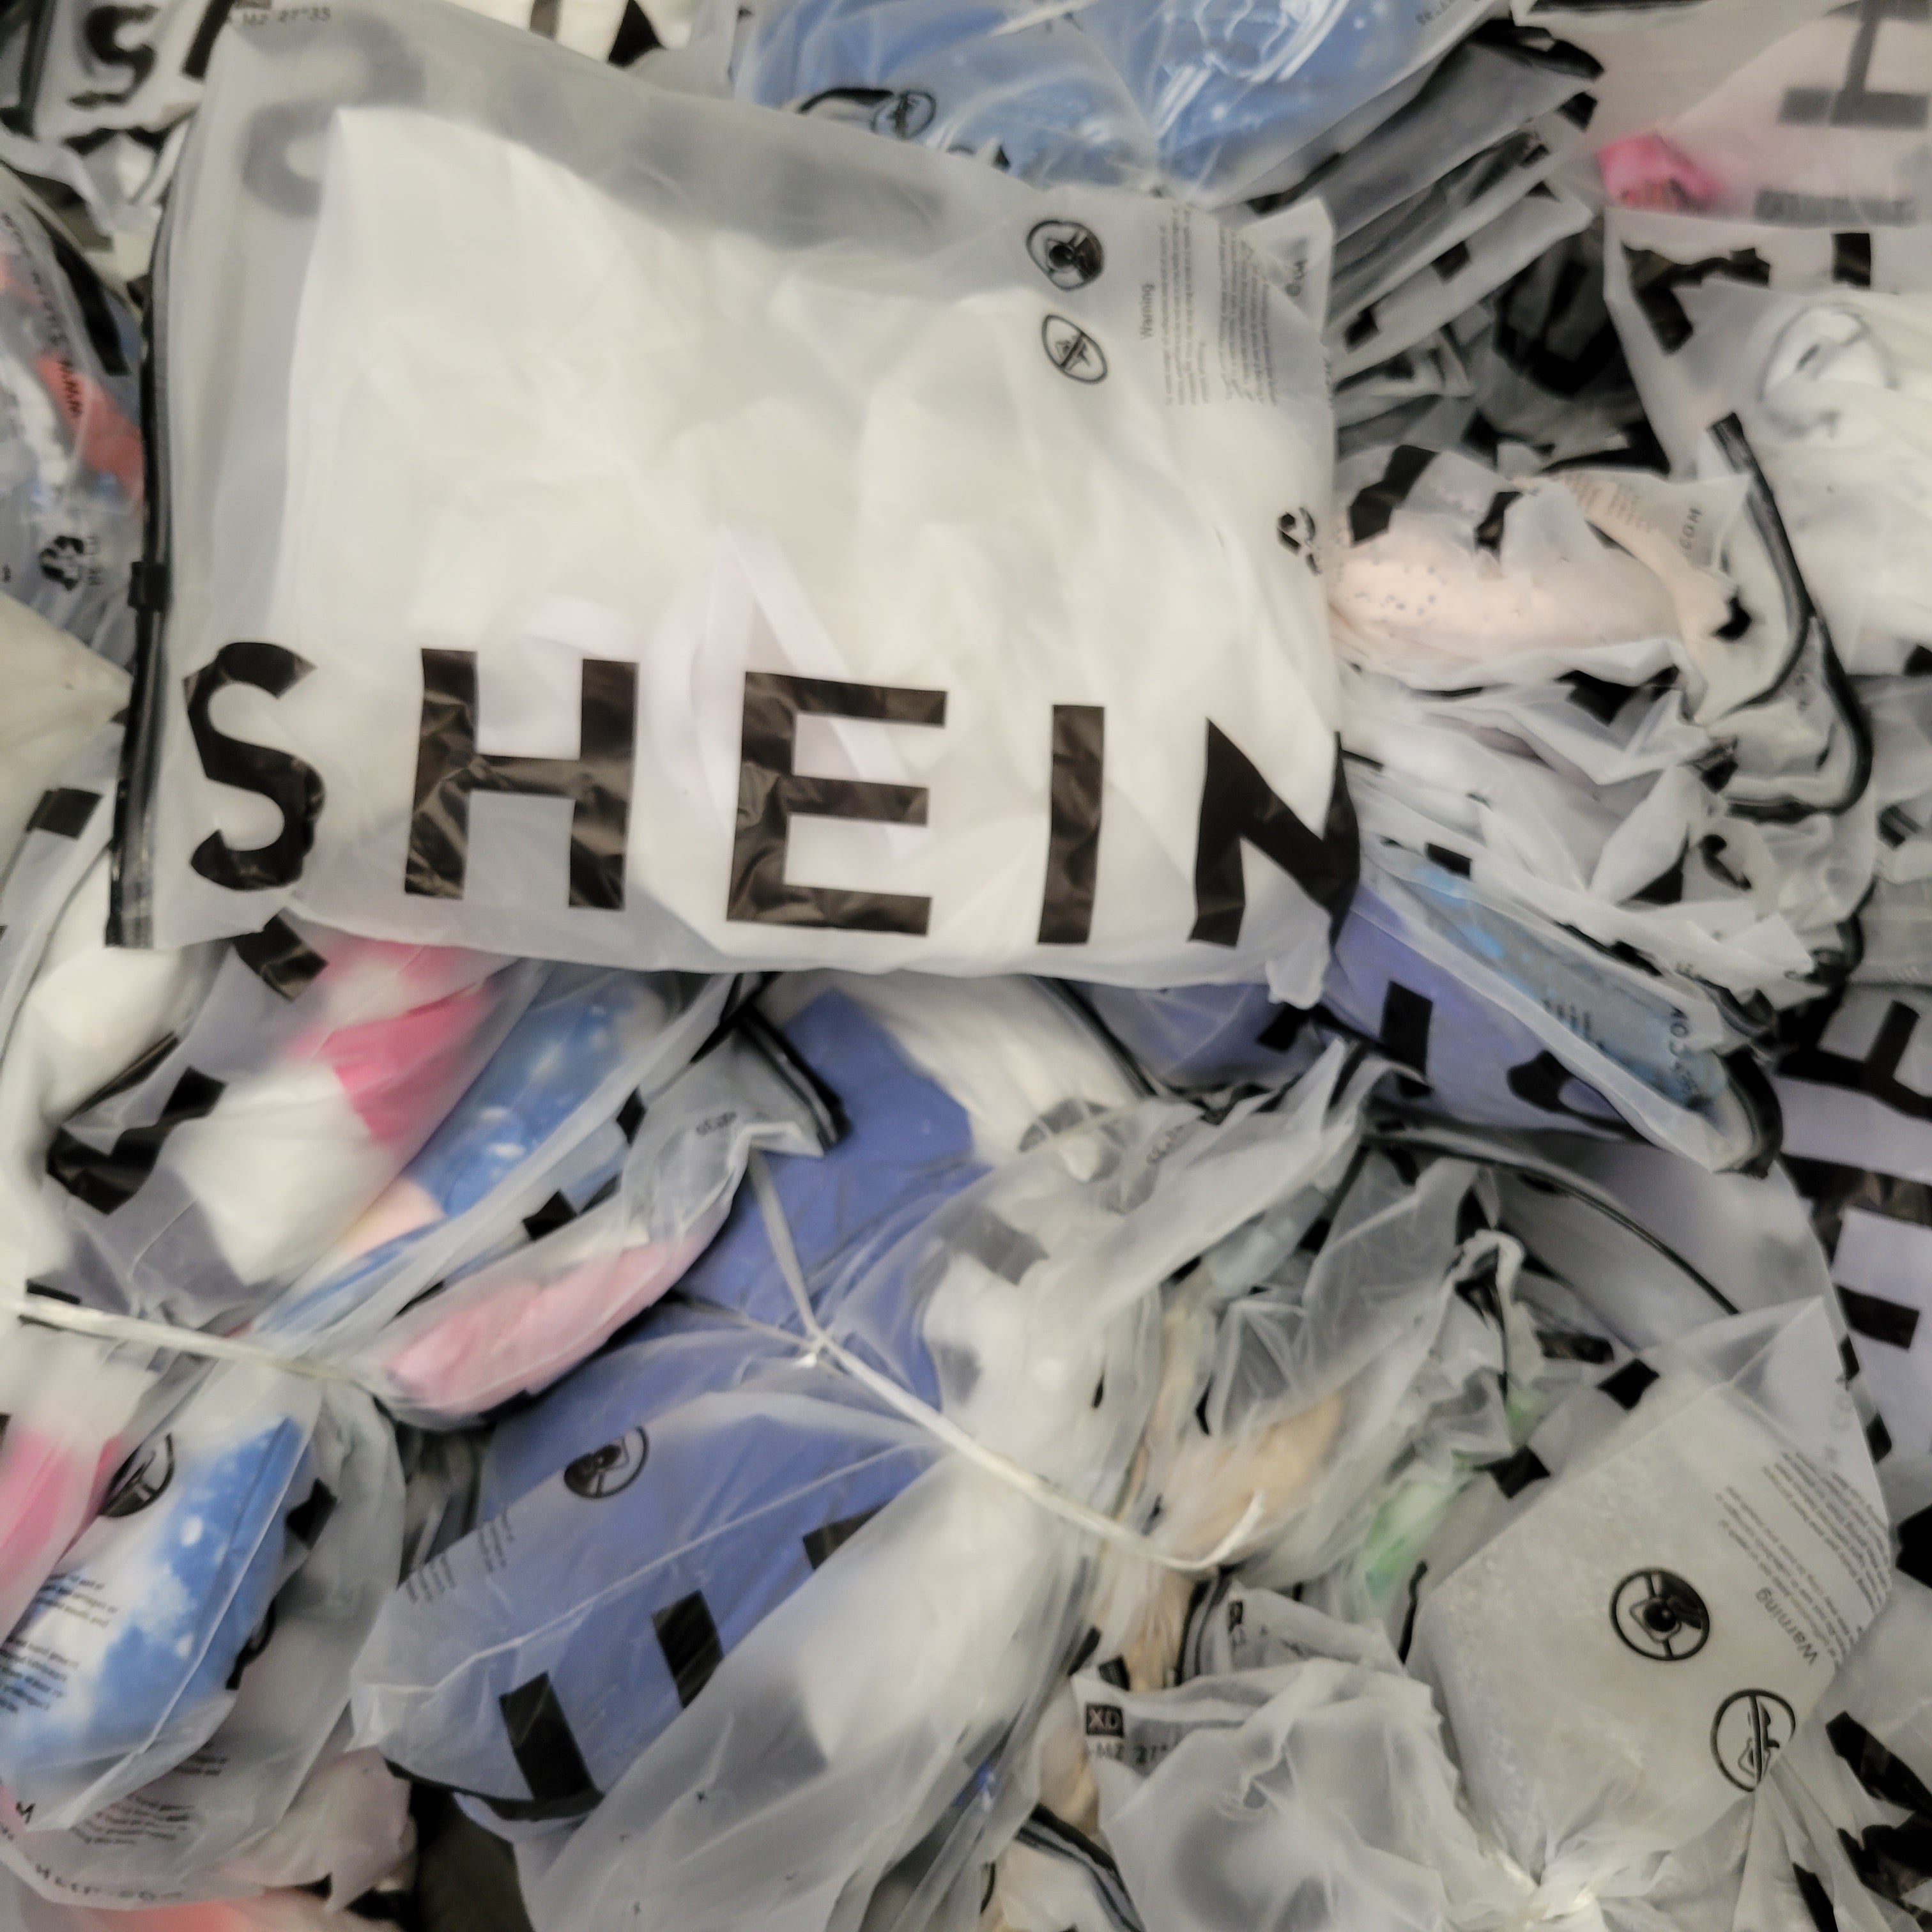 SHEIN Mystery Bundle, Mixed Clothing Apparel, 50 Units | FREE SHIPPING (8094590370030)